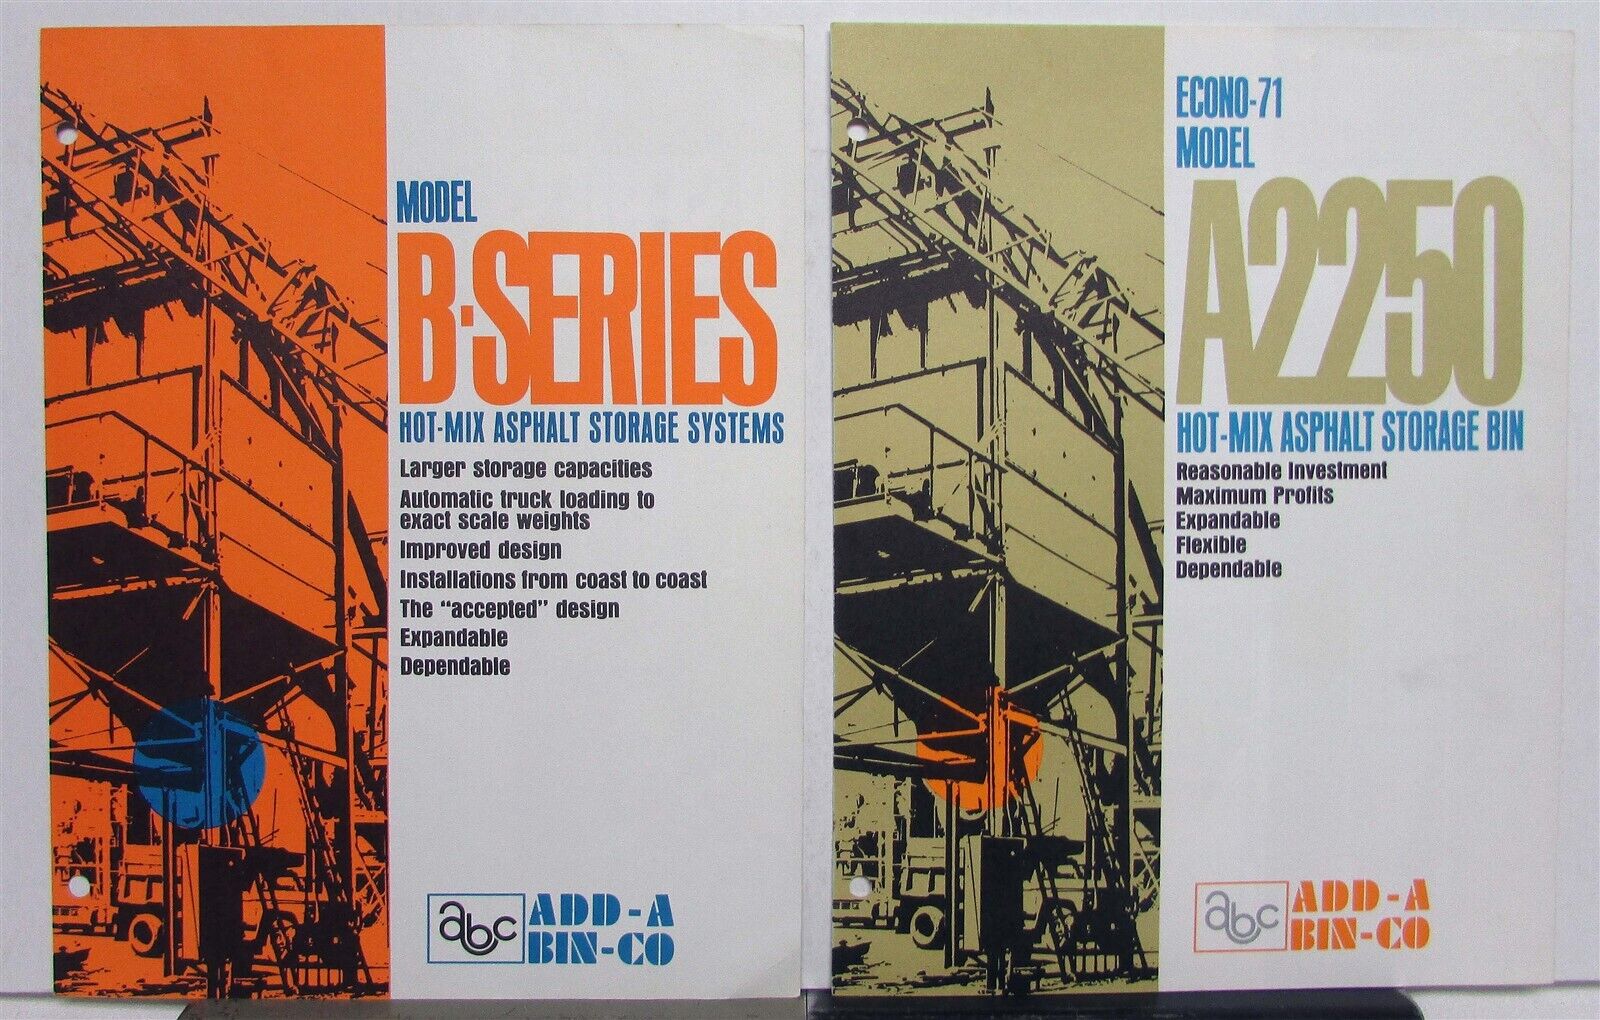 1960s ABC Add A Bin Co Econo-71 A2250 B-Series Construction Features Brochures